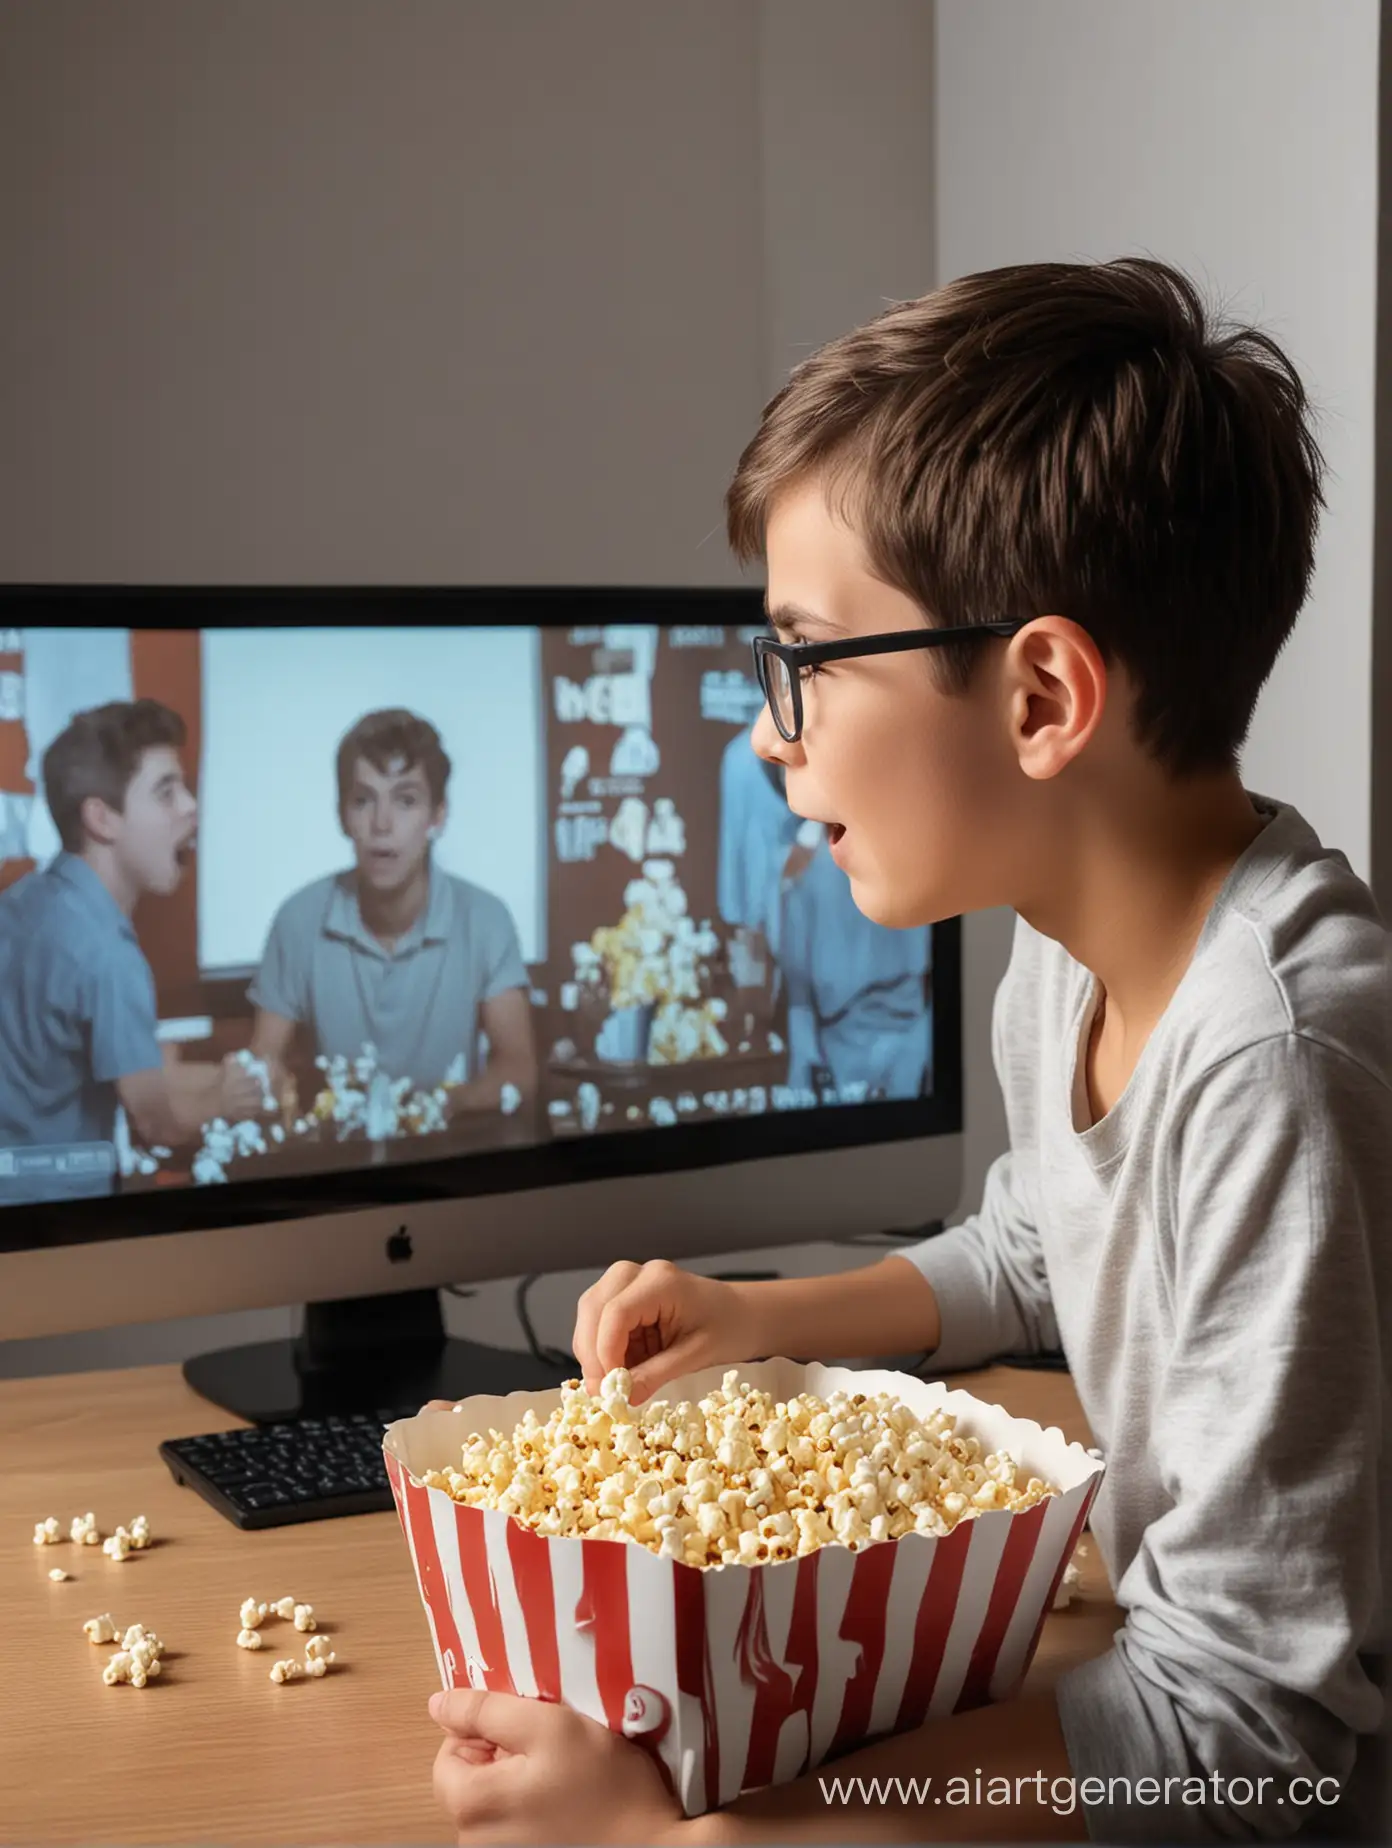 Boy-Watching-Movie-on-Personal-Computer-While-Eating-Popcorn